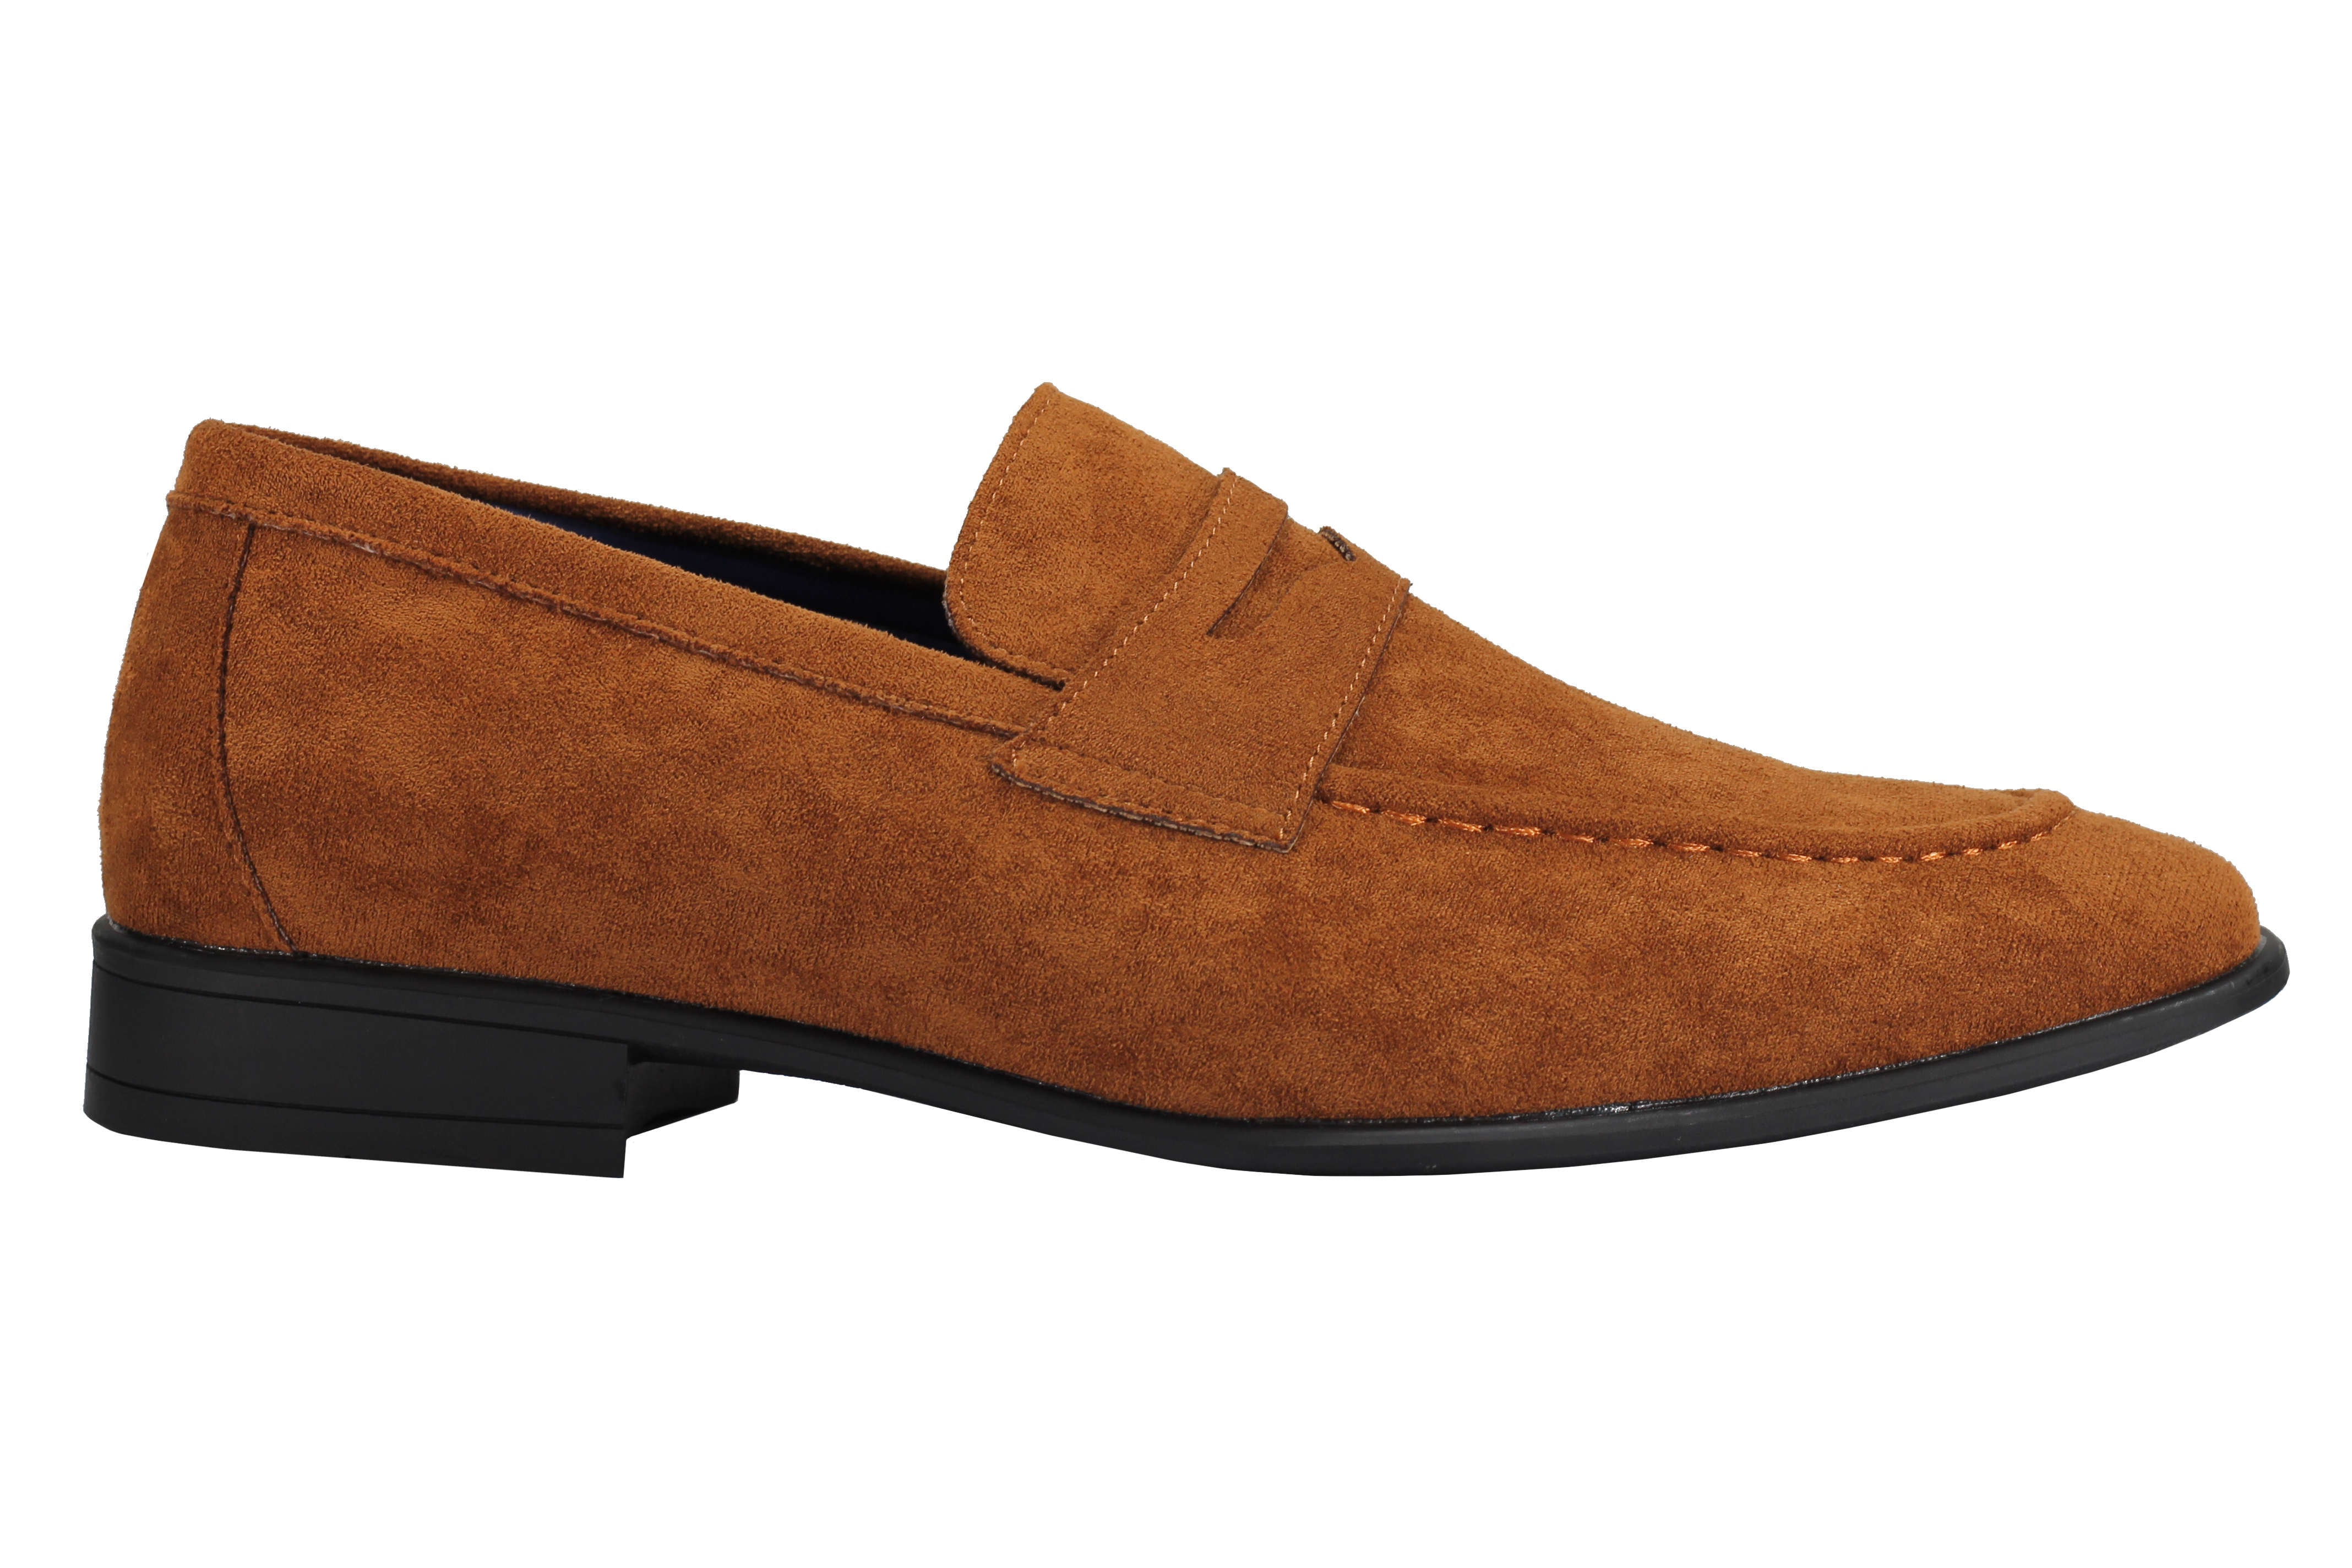 SUEDE PENNY LOAFERS